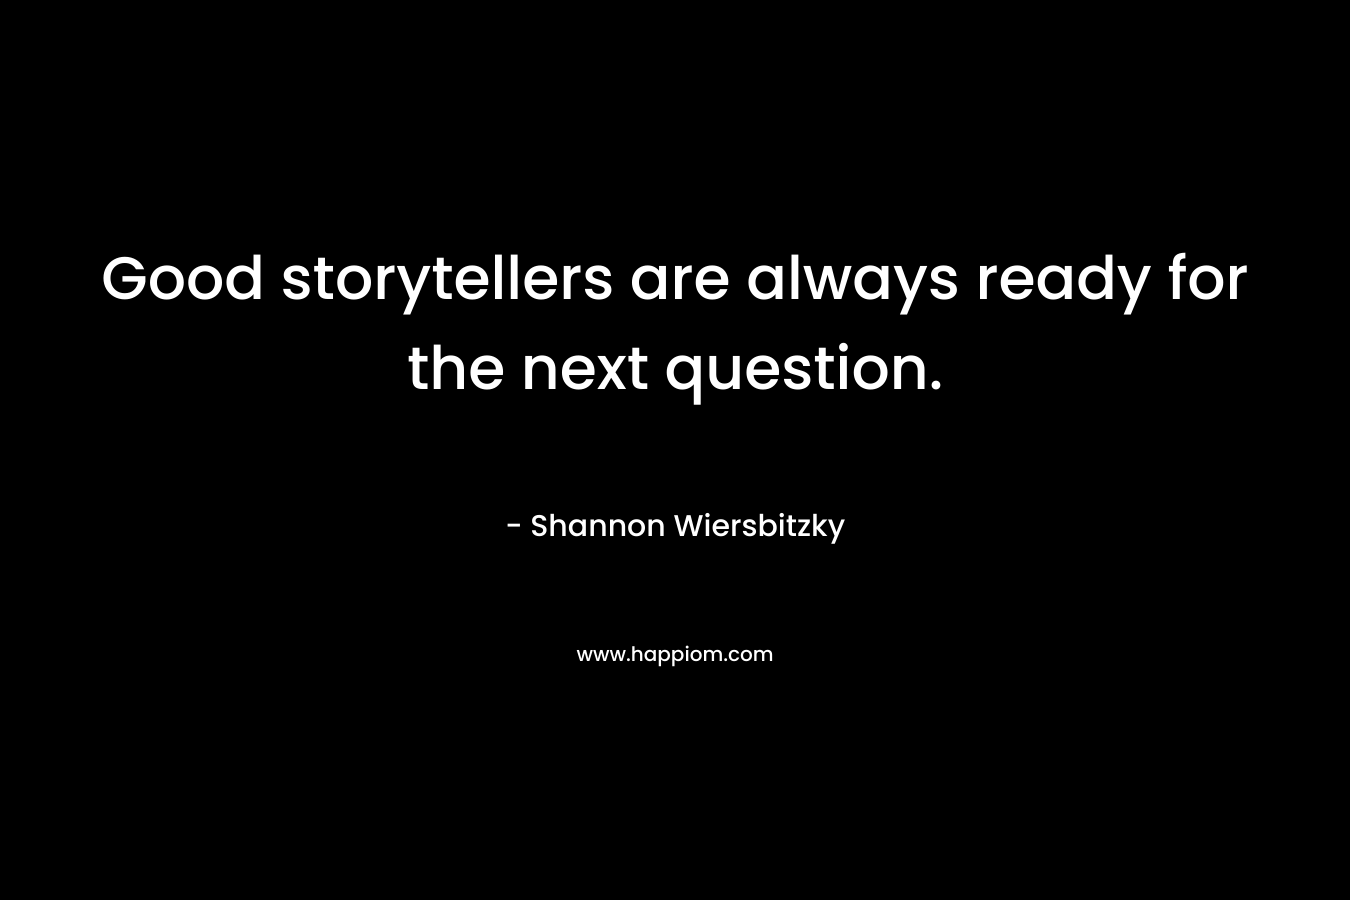 Good storytellers are always ready for the next question.